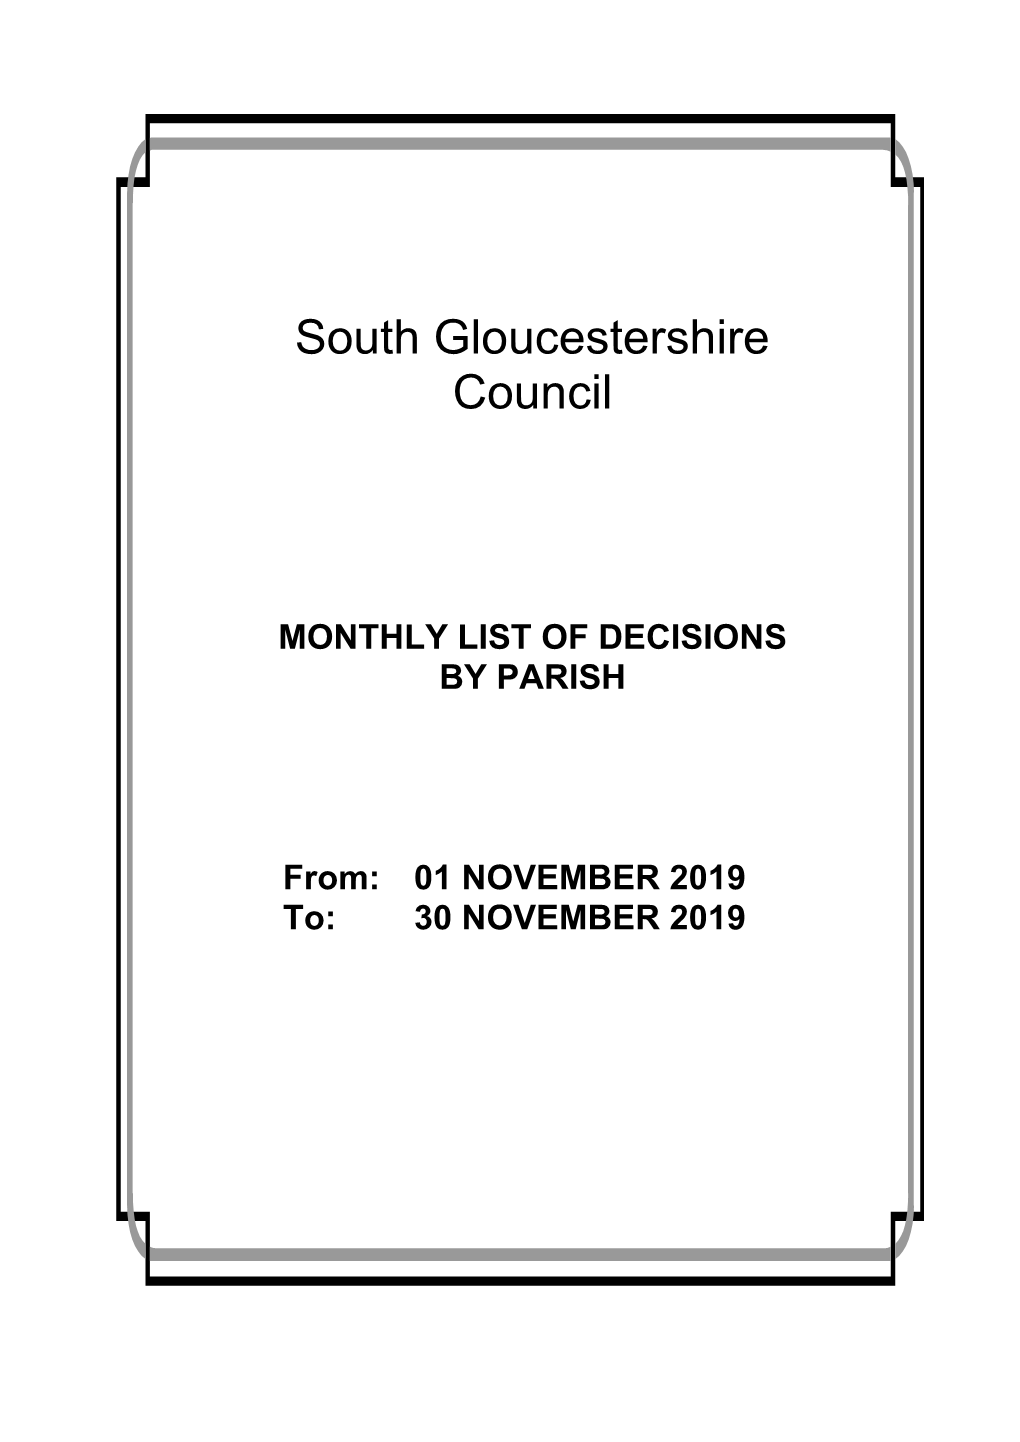 MONTHLY LIST of DECISIONS by PARISH From: 01 NOVEMBER 2019 To